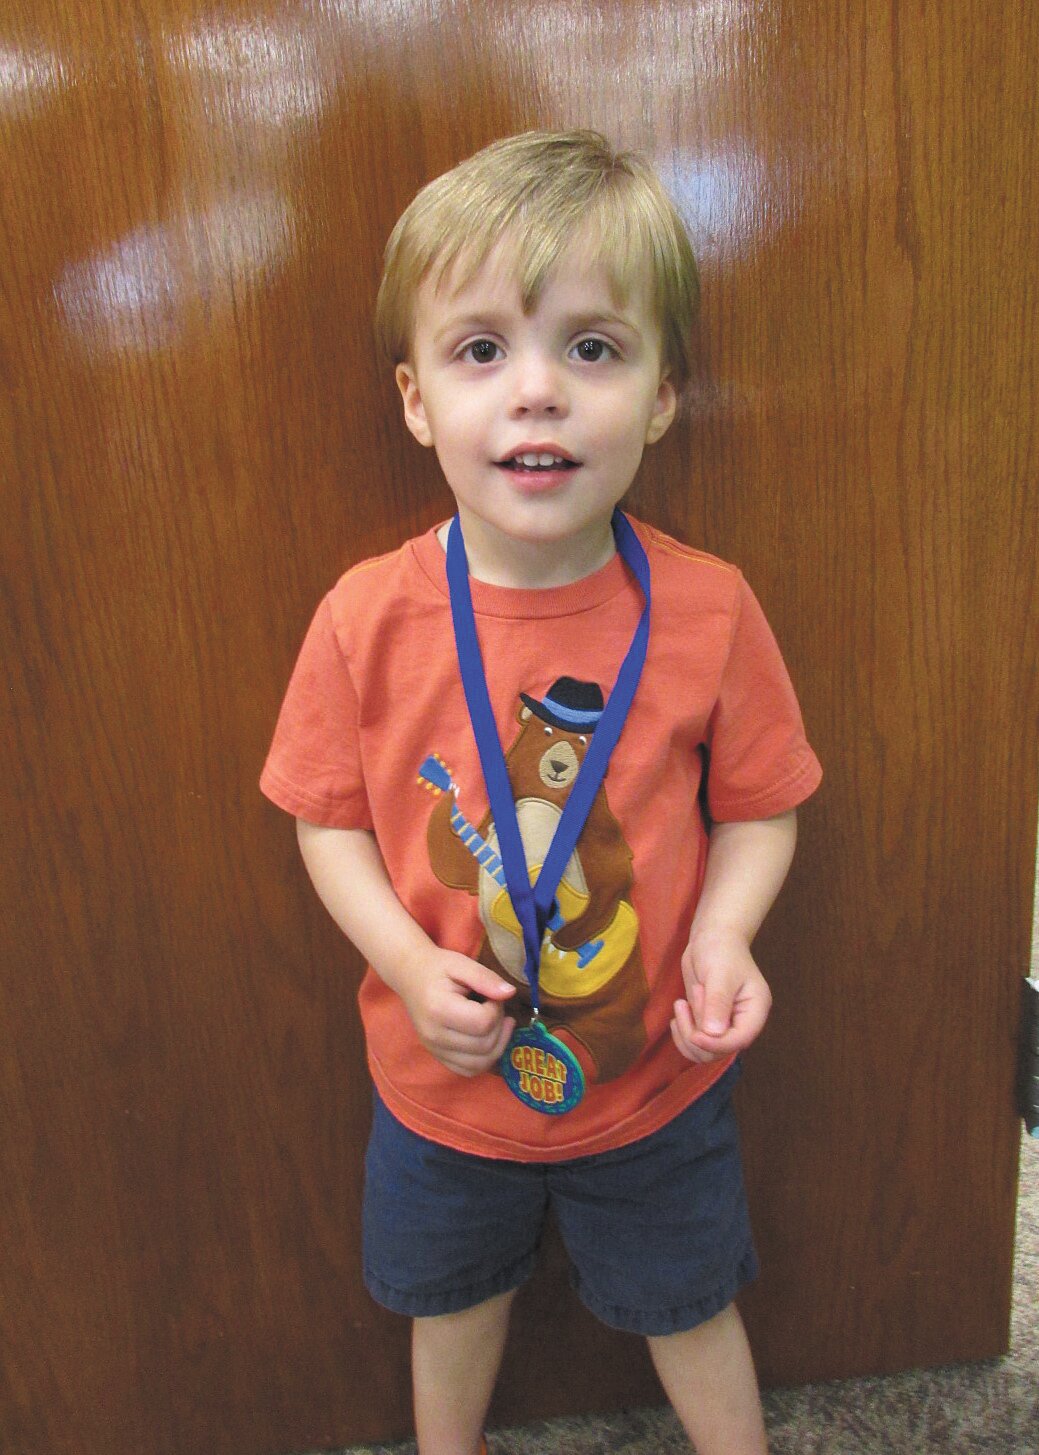 Matthew Fossnock, age 2, has completed the 1,000 Books Before Kindergarten program at the Crawfordsville District Public Library. He is the son of Mary and Josh Fossnock. Matthew's favorite book is "Hand, Hand, Fingers, Thumb" by Al Perkins. Mom said, " The reading program and story times are a big part of the reason Matthew loves to read! He always enjoys going to the library for toddler story time."